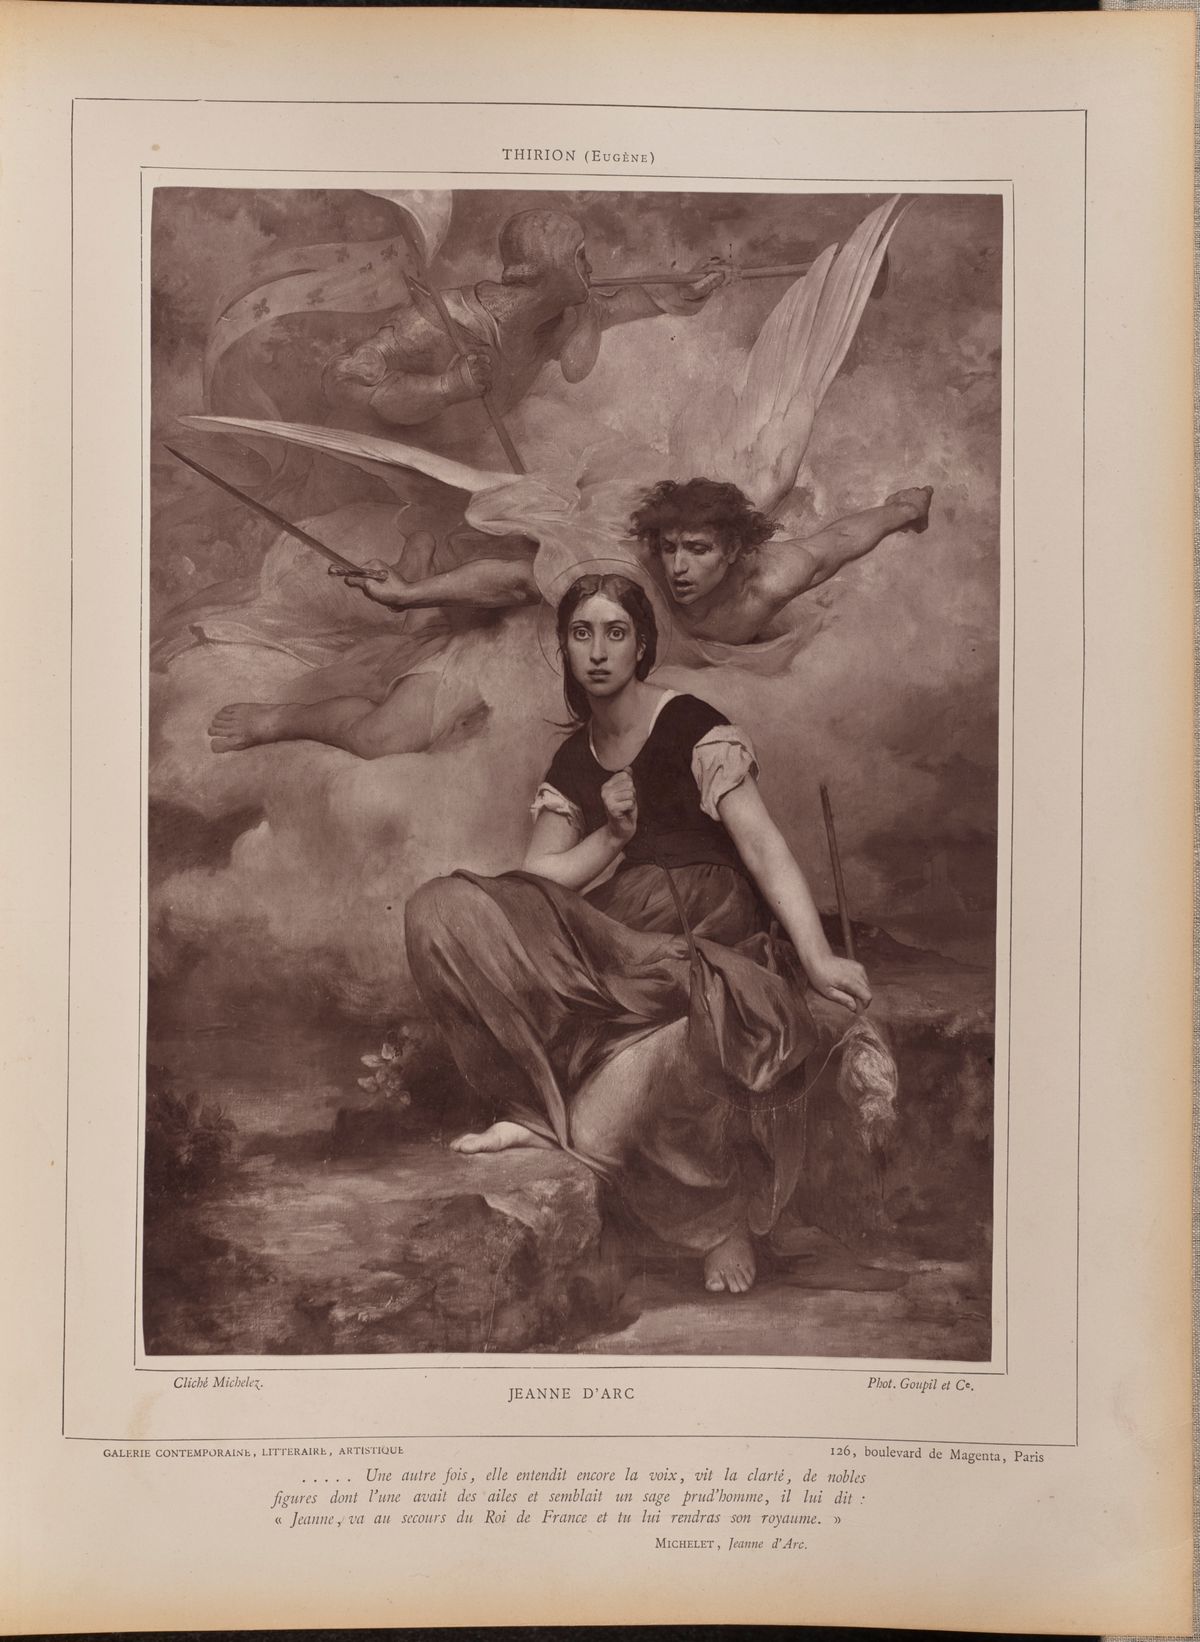 Joan of Arc by Charles Michelez (1883) - Public Domain Catholic Painting